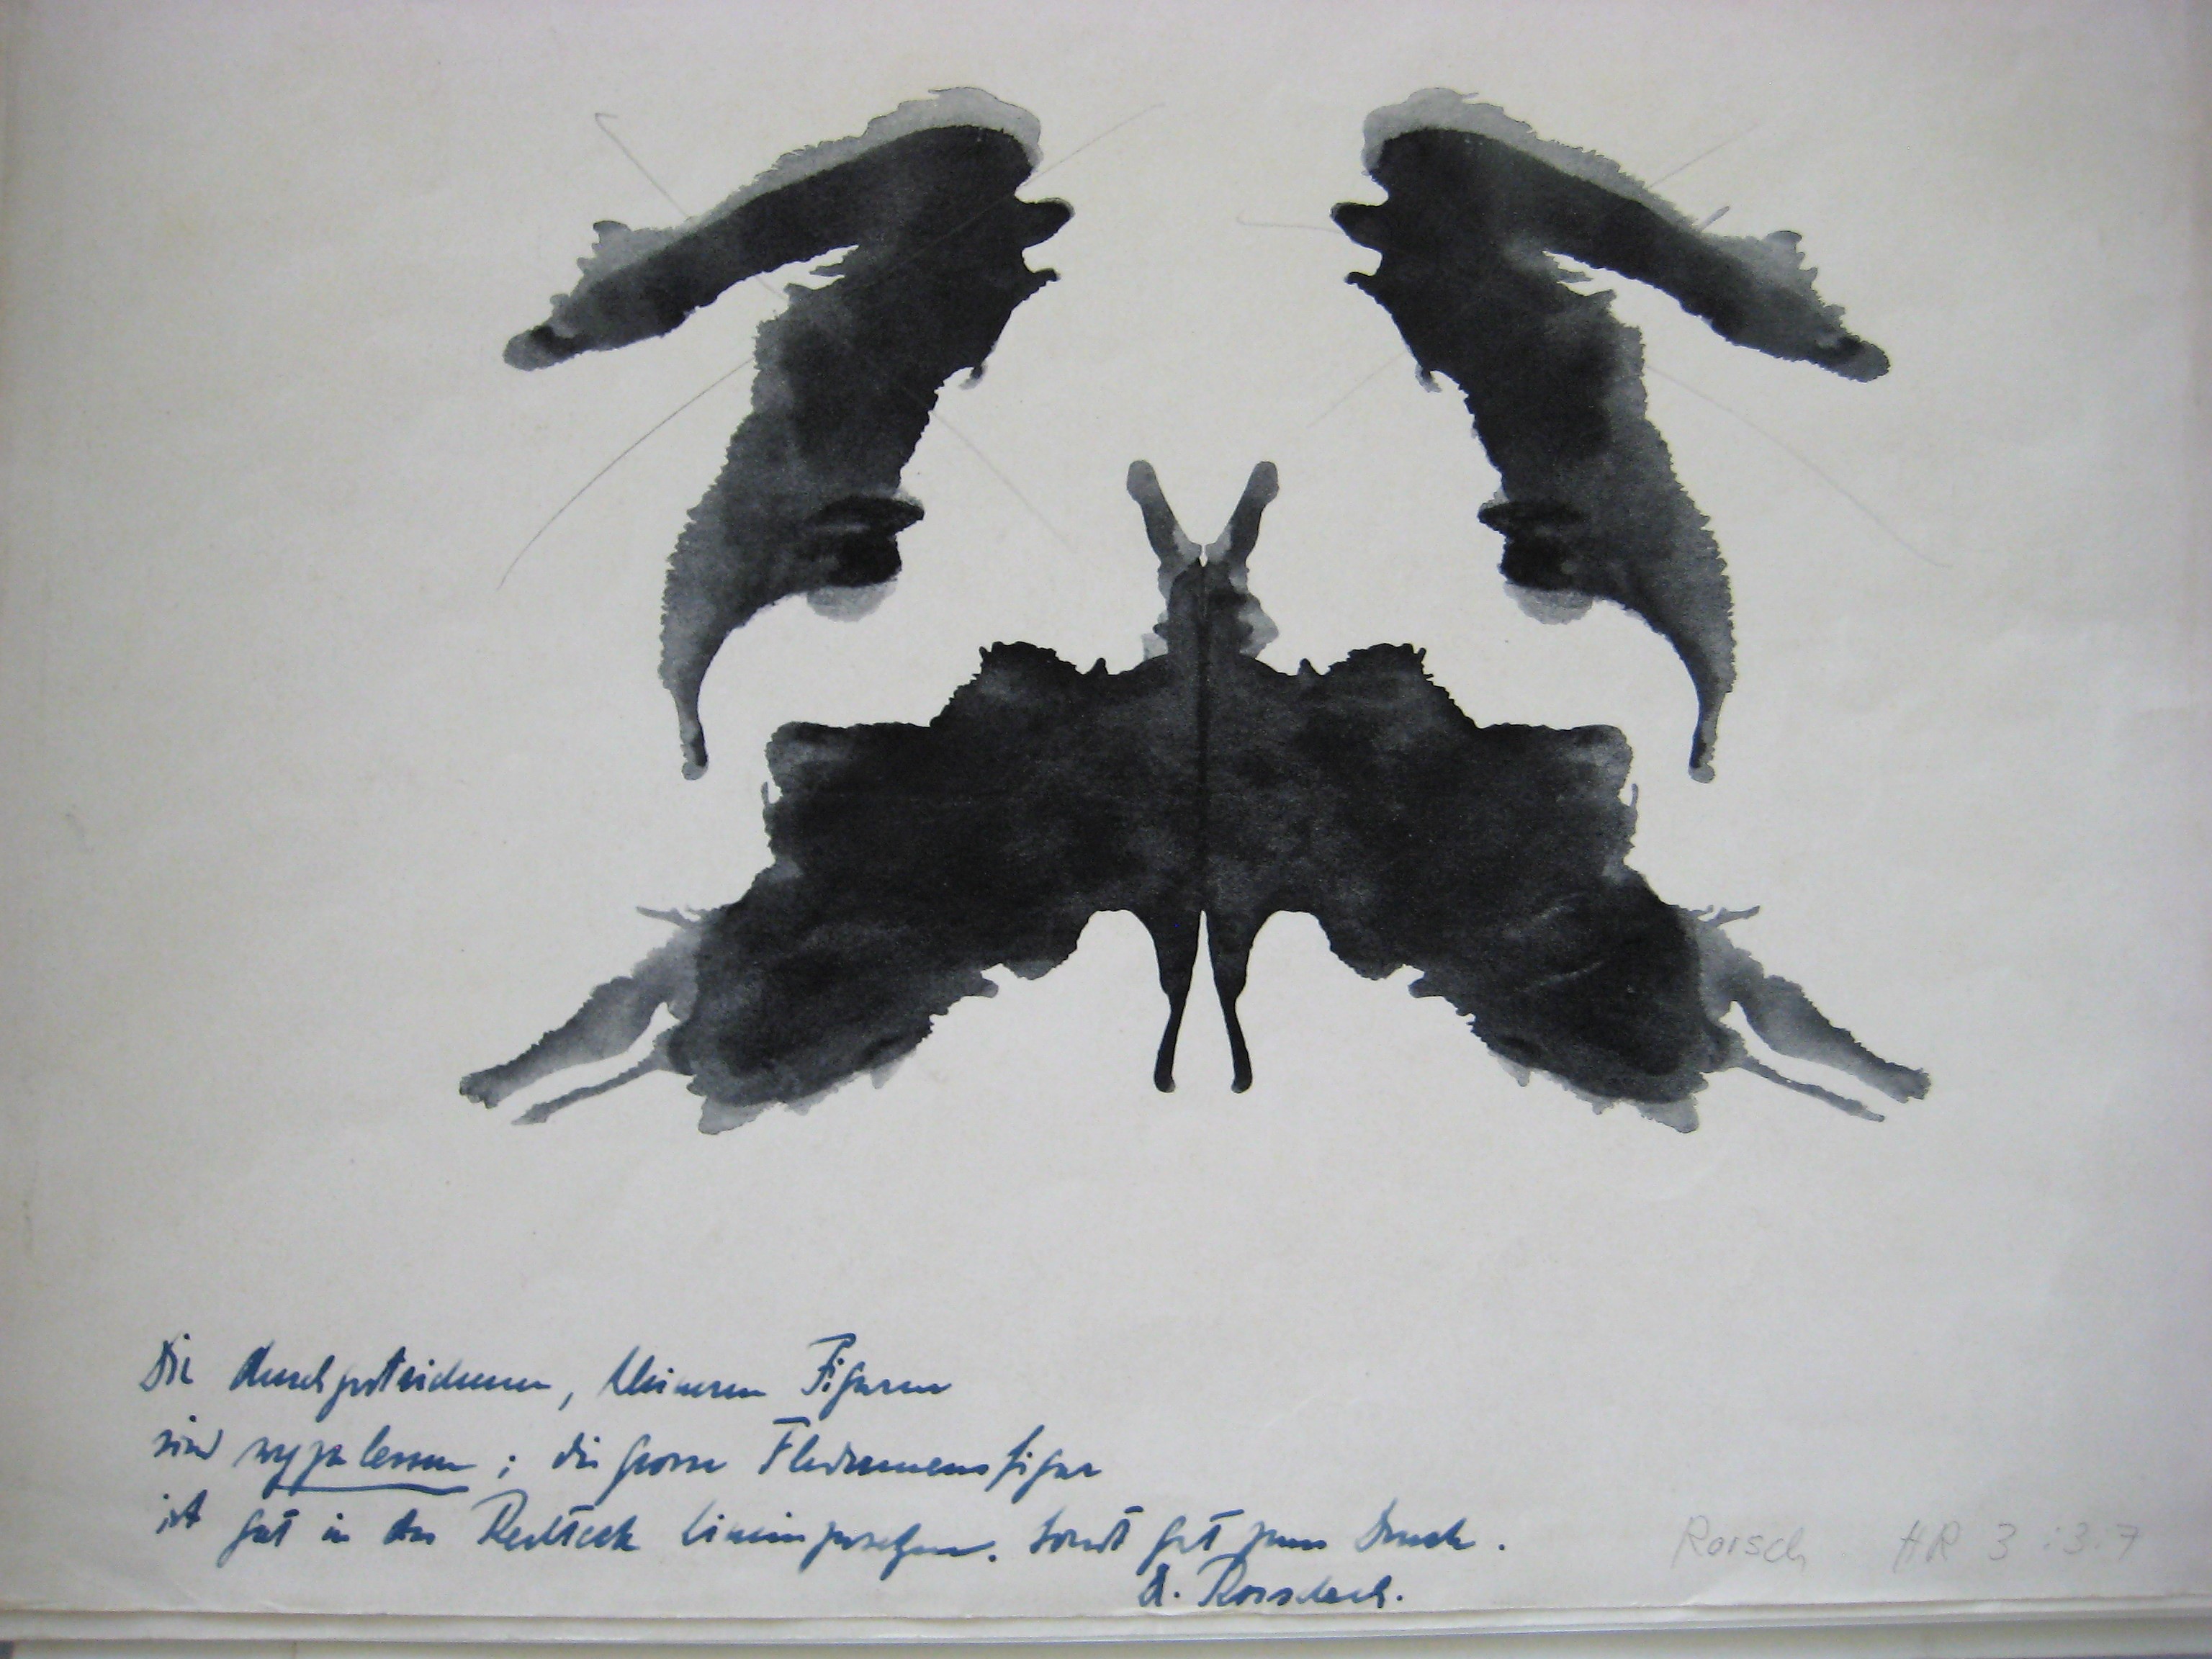 A Rorschach blot with publisher notes.